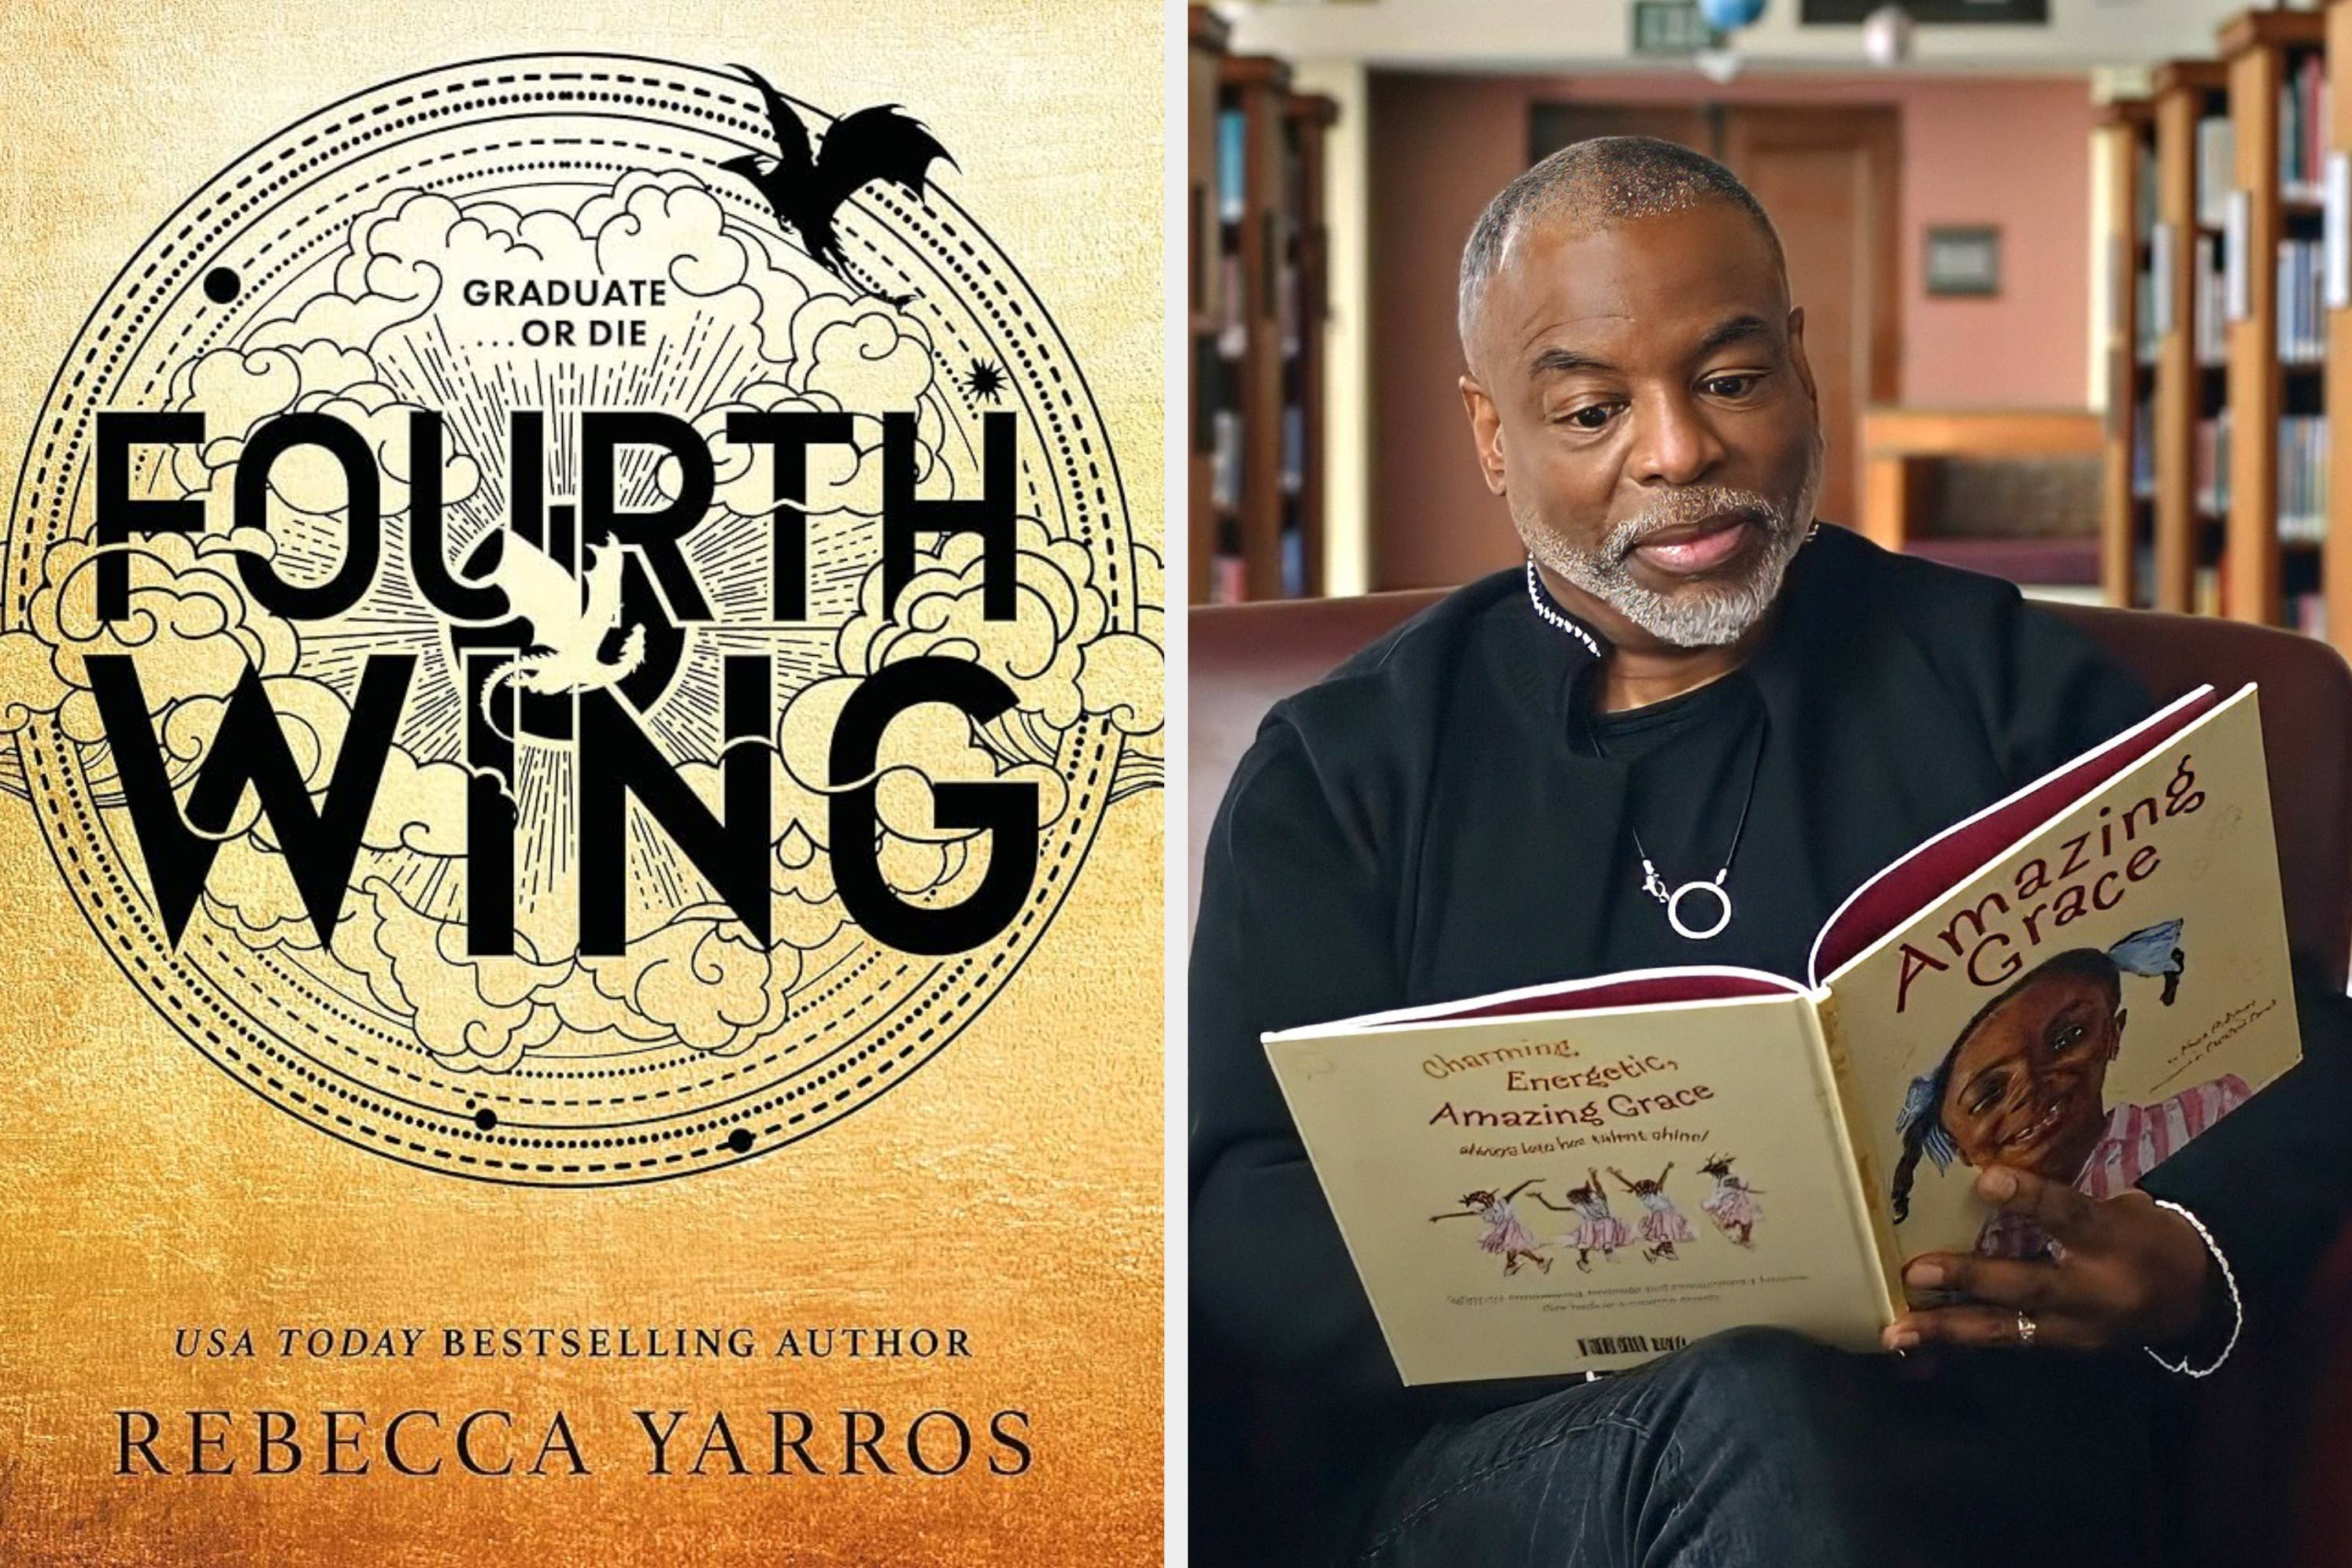 On the left, the book cover of "Fourth Wing" by Rebecca Yarros. On the right, LeVar Burton reads "Amazing Grace" in a library